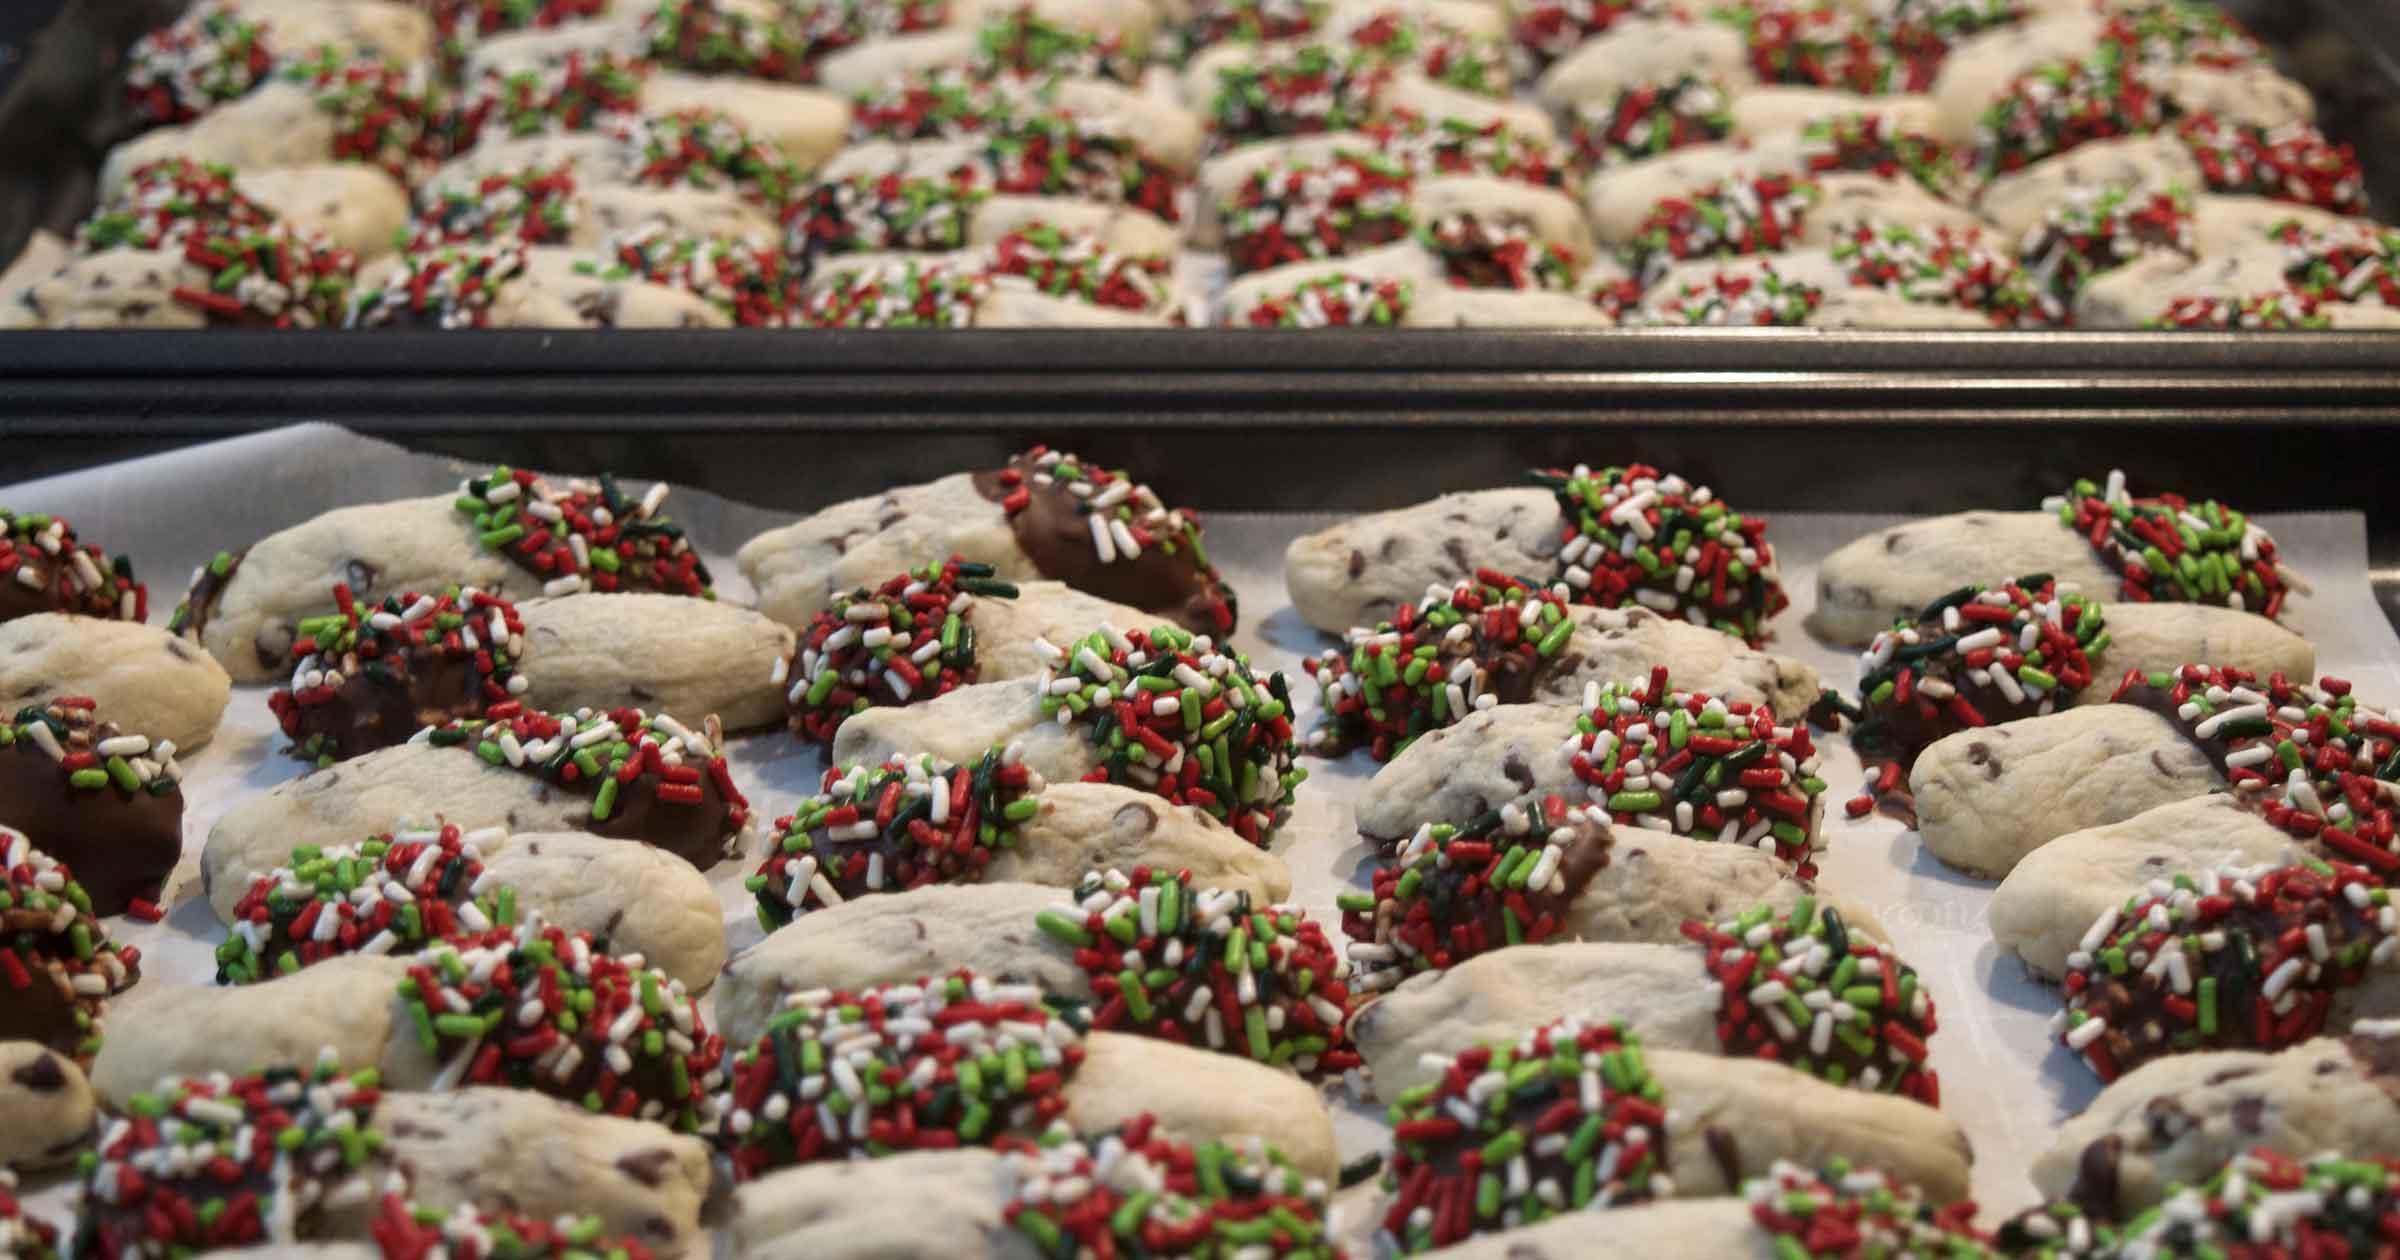 Baking sheets packed with chocolate-dipped chocolate chip cookies with holiday sprinkles